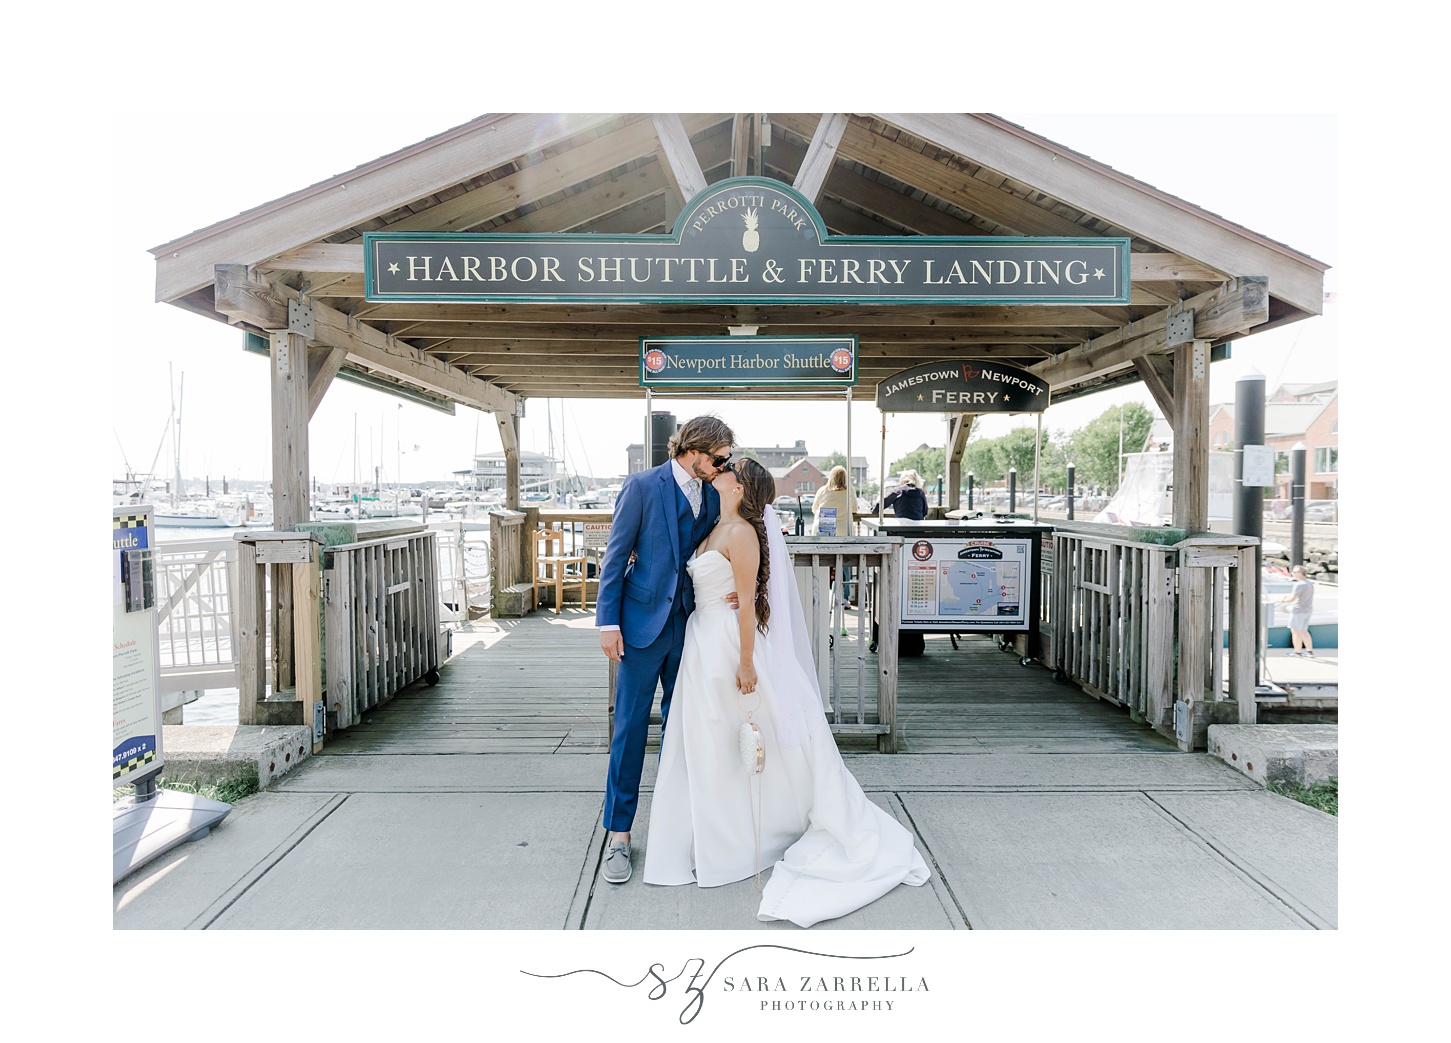 bride and groom kiss under sign at docks in Newport RI